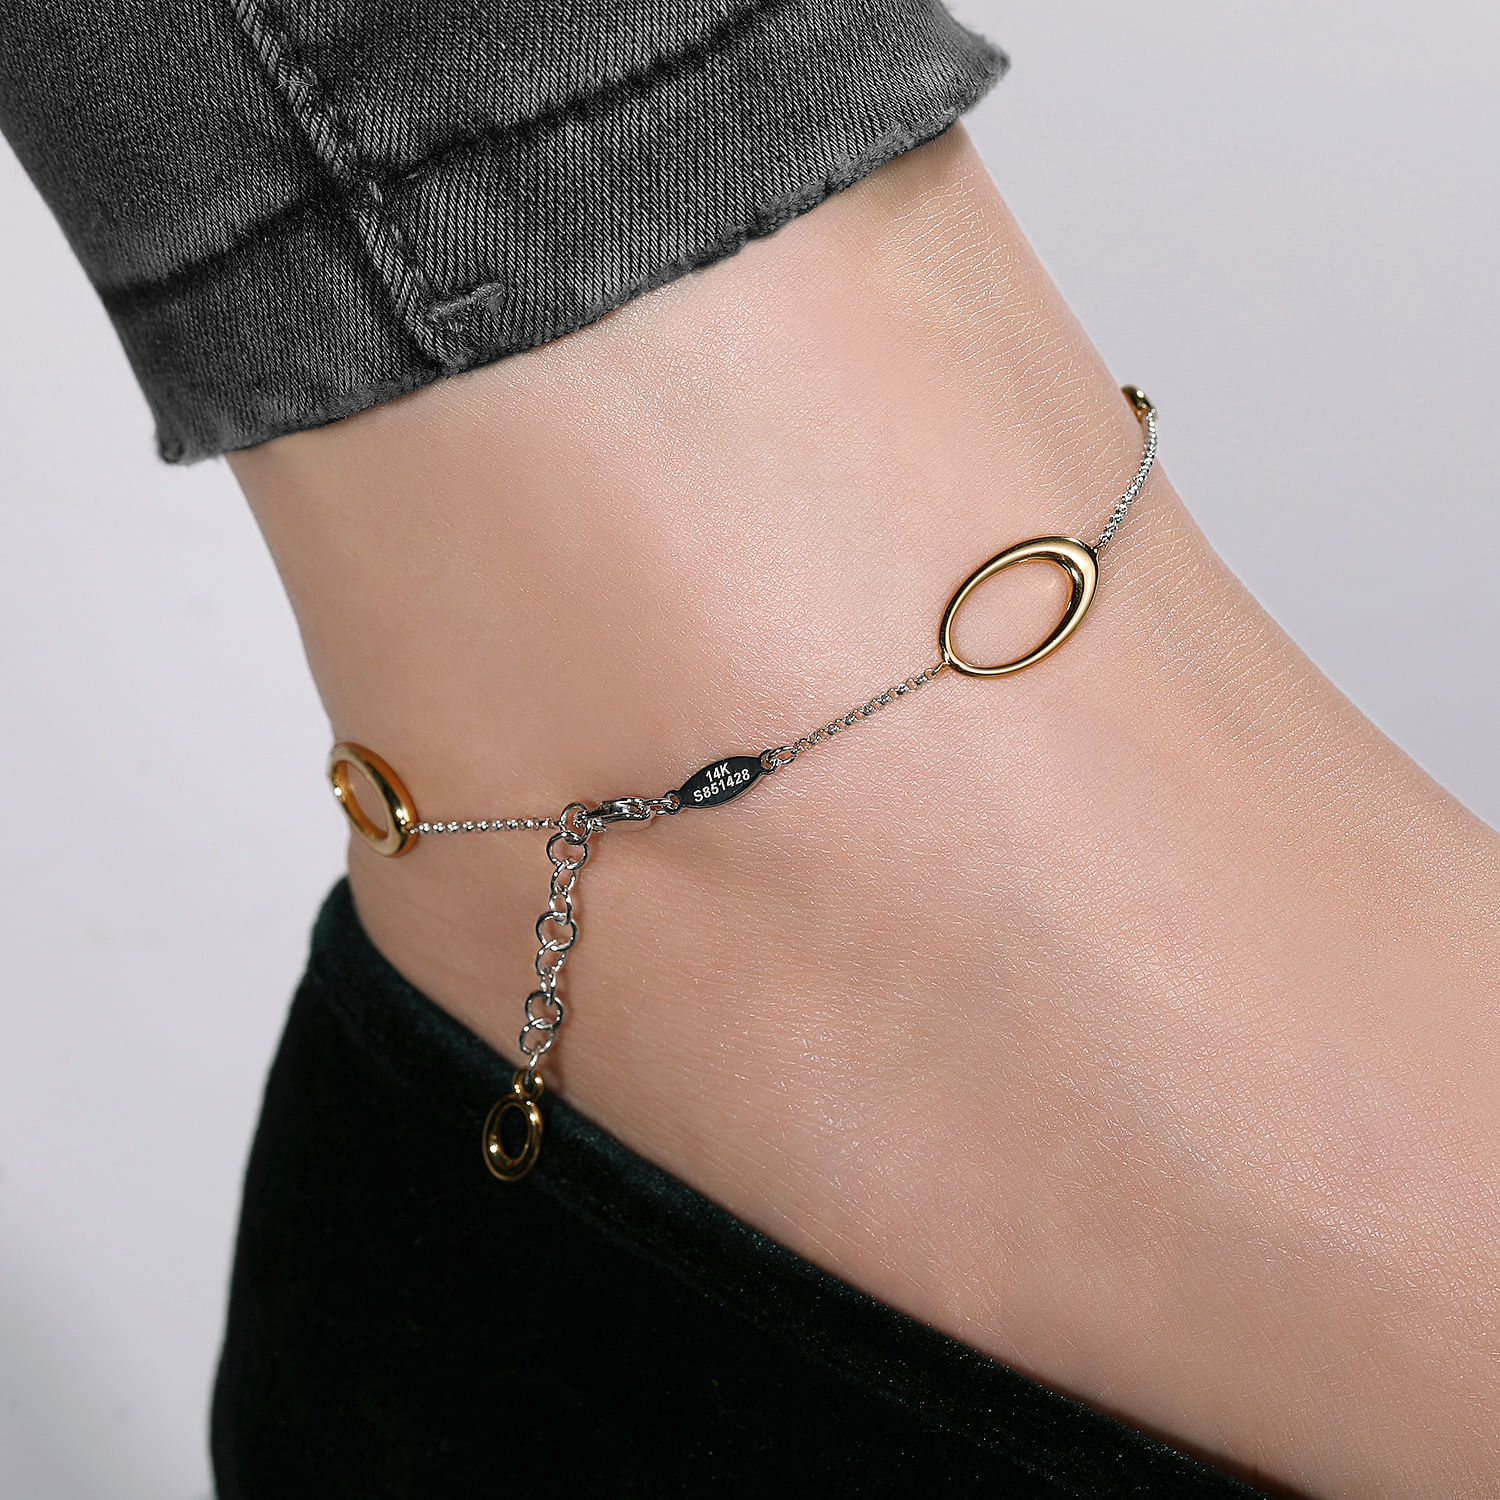 14K White-Yellow Gold Chain Ankle Bracelet with Oval Link Stations and Diamond Accents